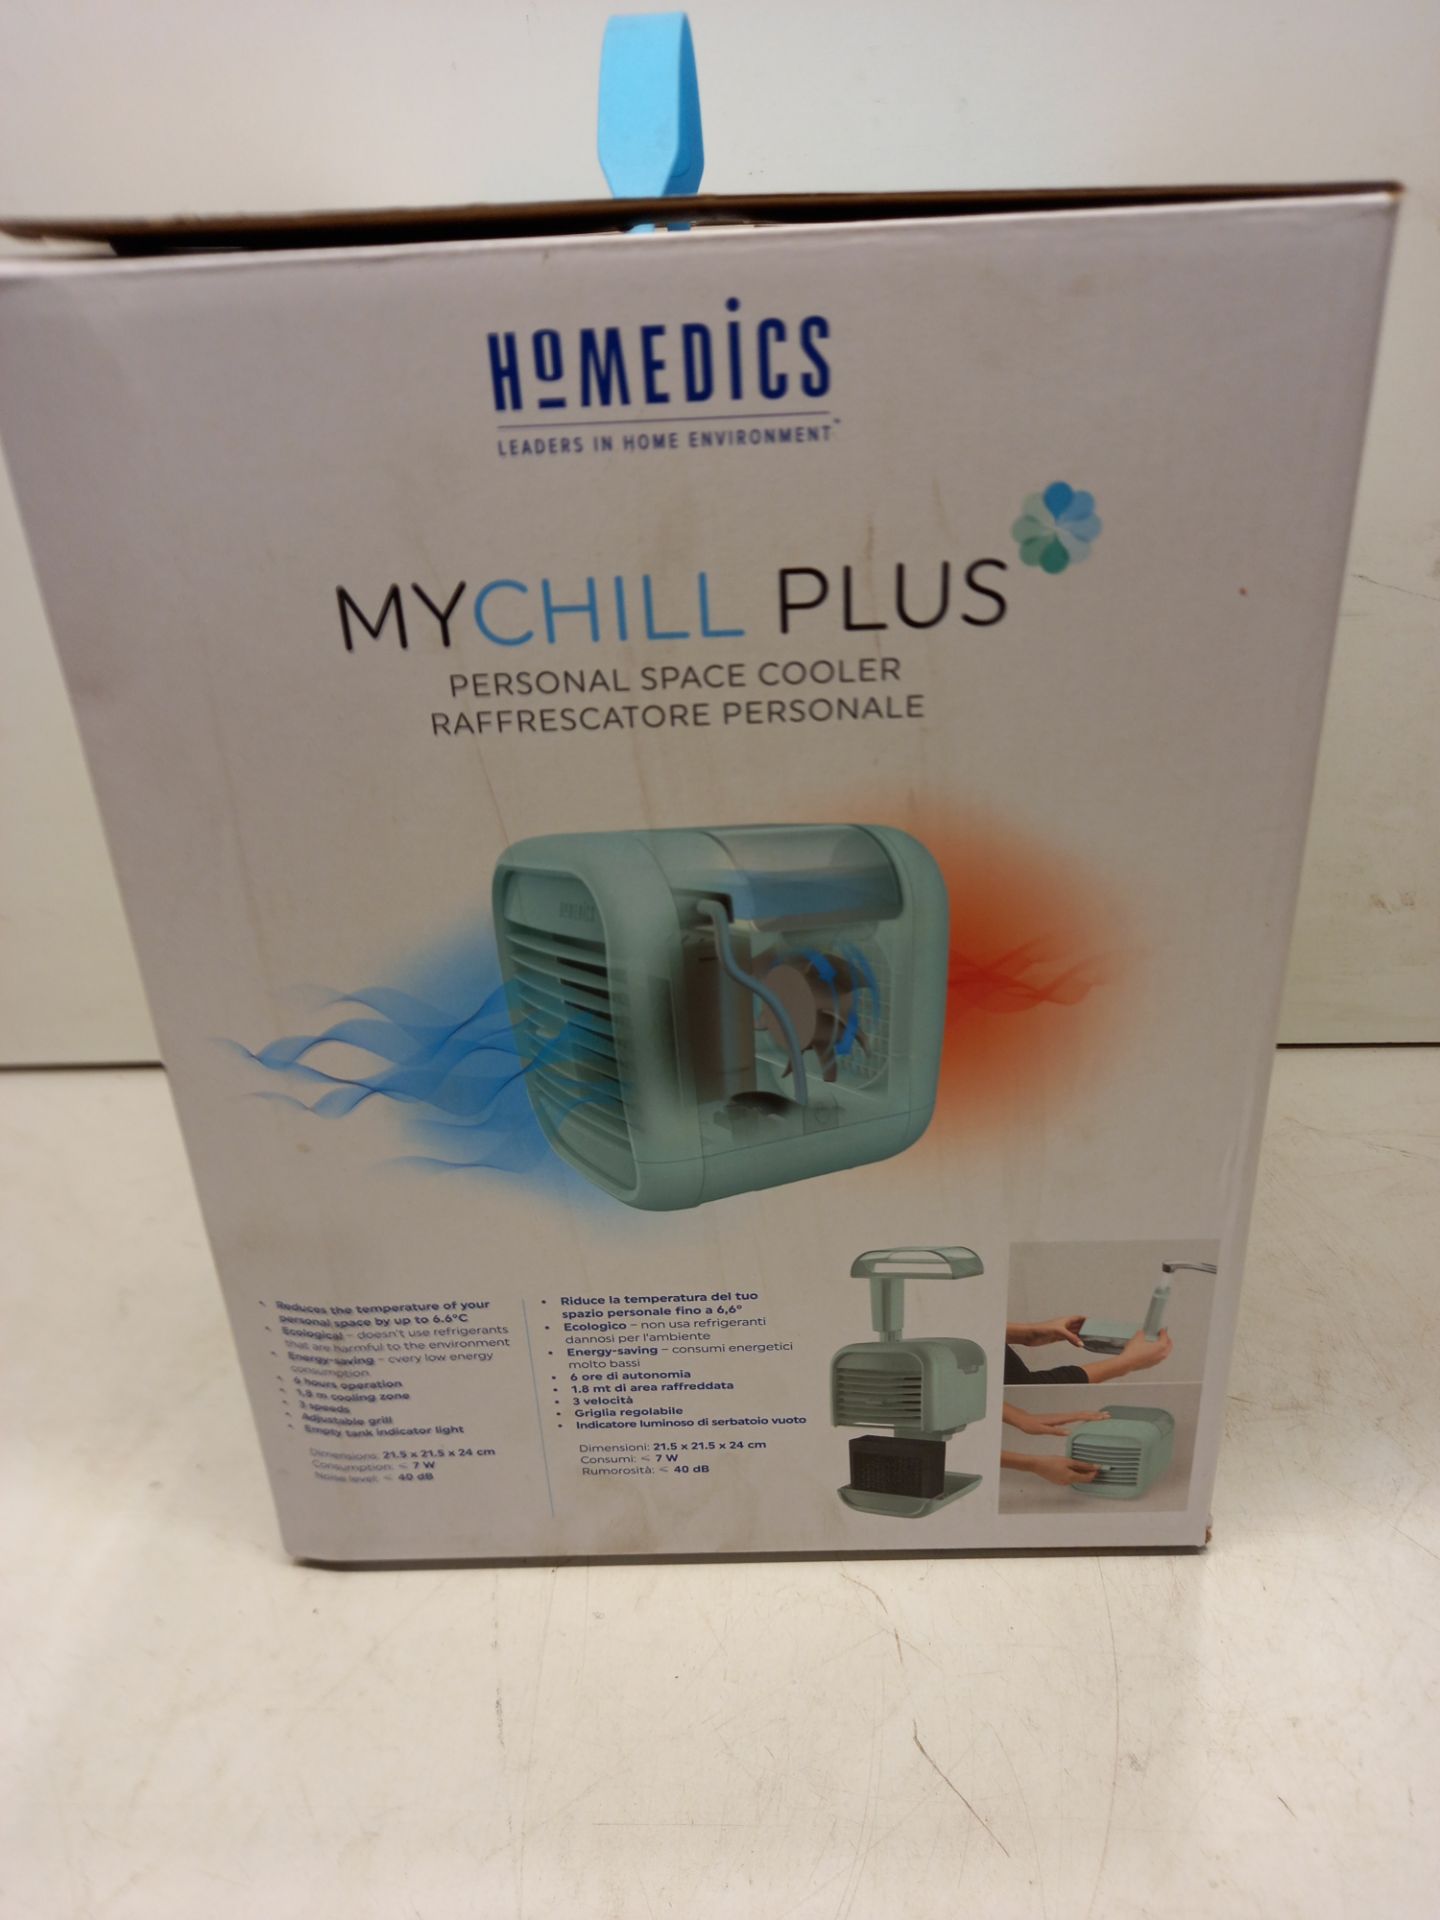 HoMedics My Chill Plus Personal Space Cooler - Image 2 of 2